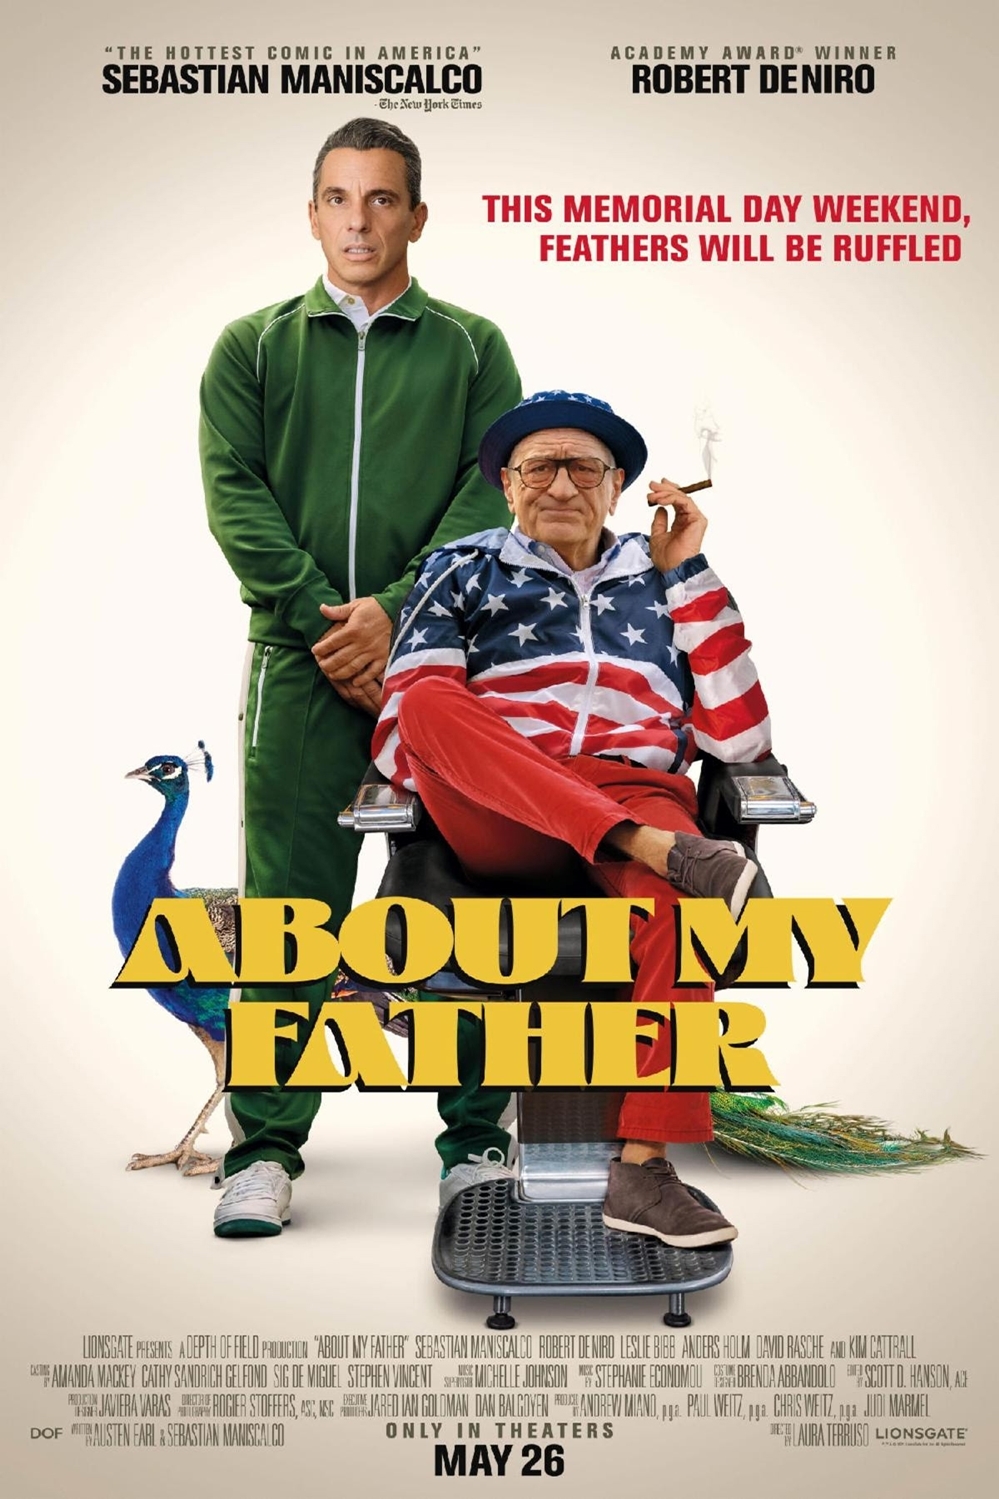 Cover Art for "About My Father"